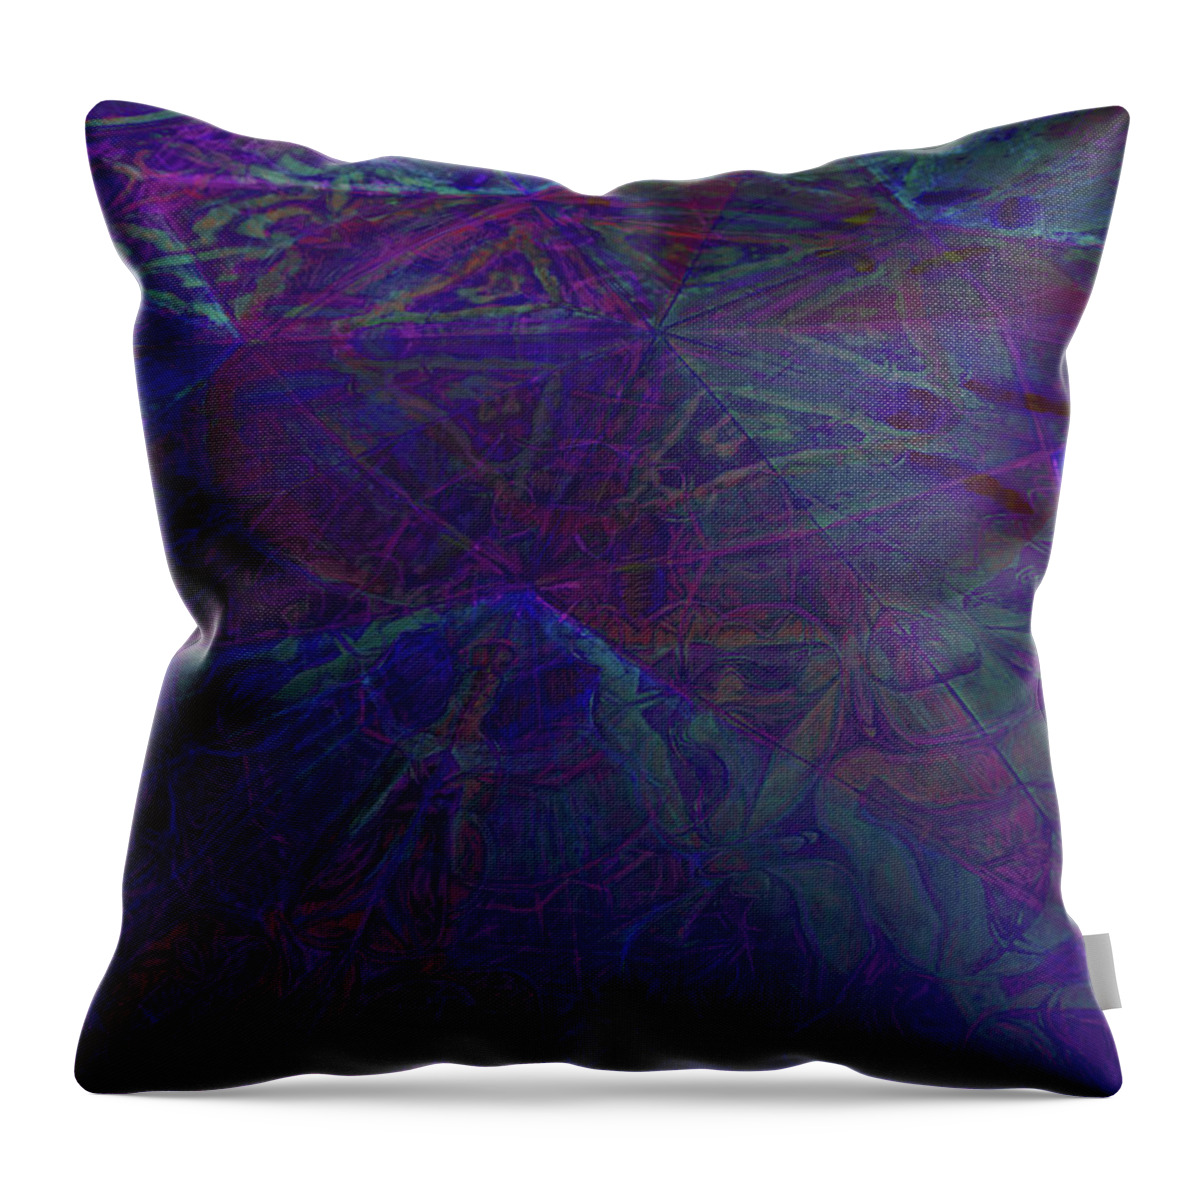 Five Sided Throw Pillow featuring the painting Organica 4 by Jeremy Robinson